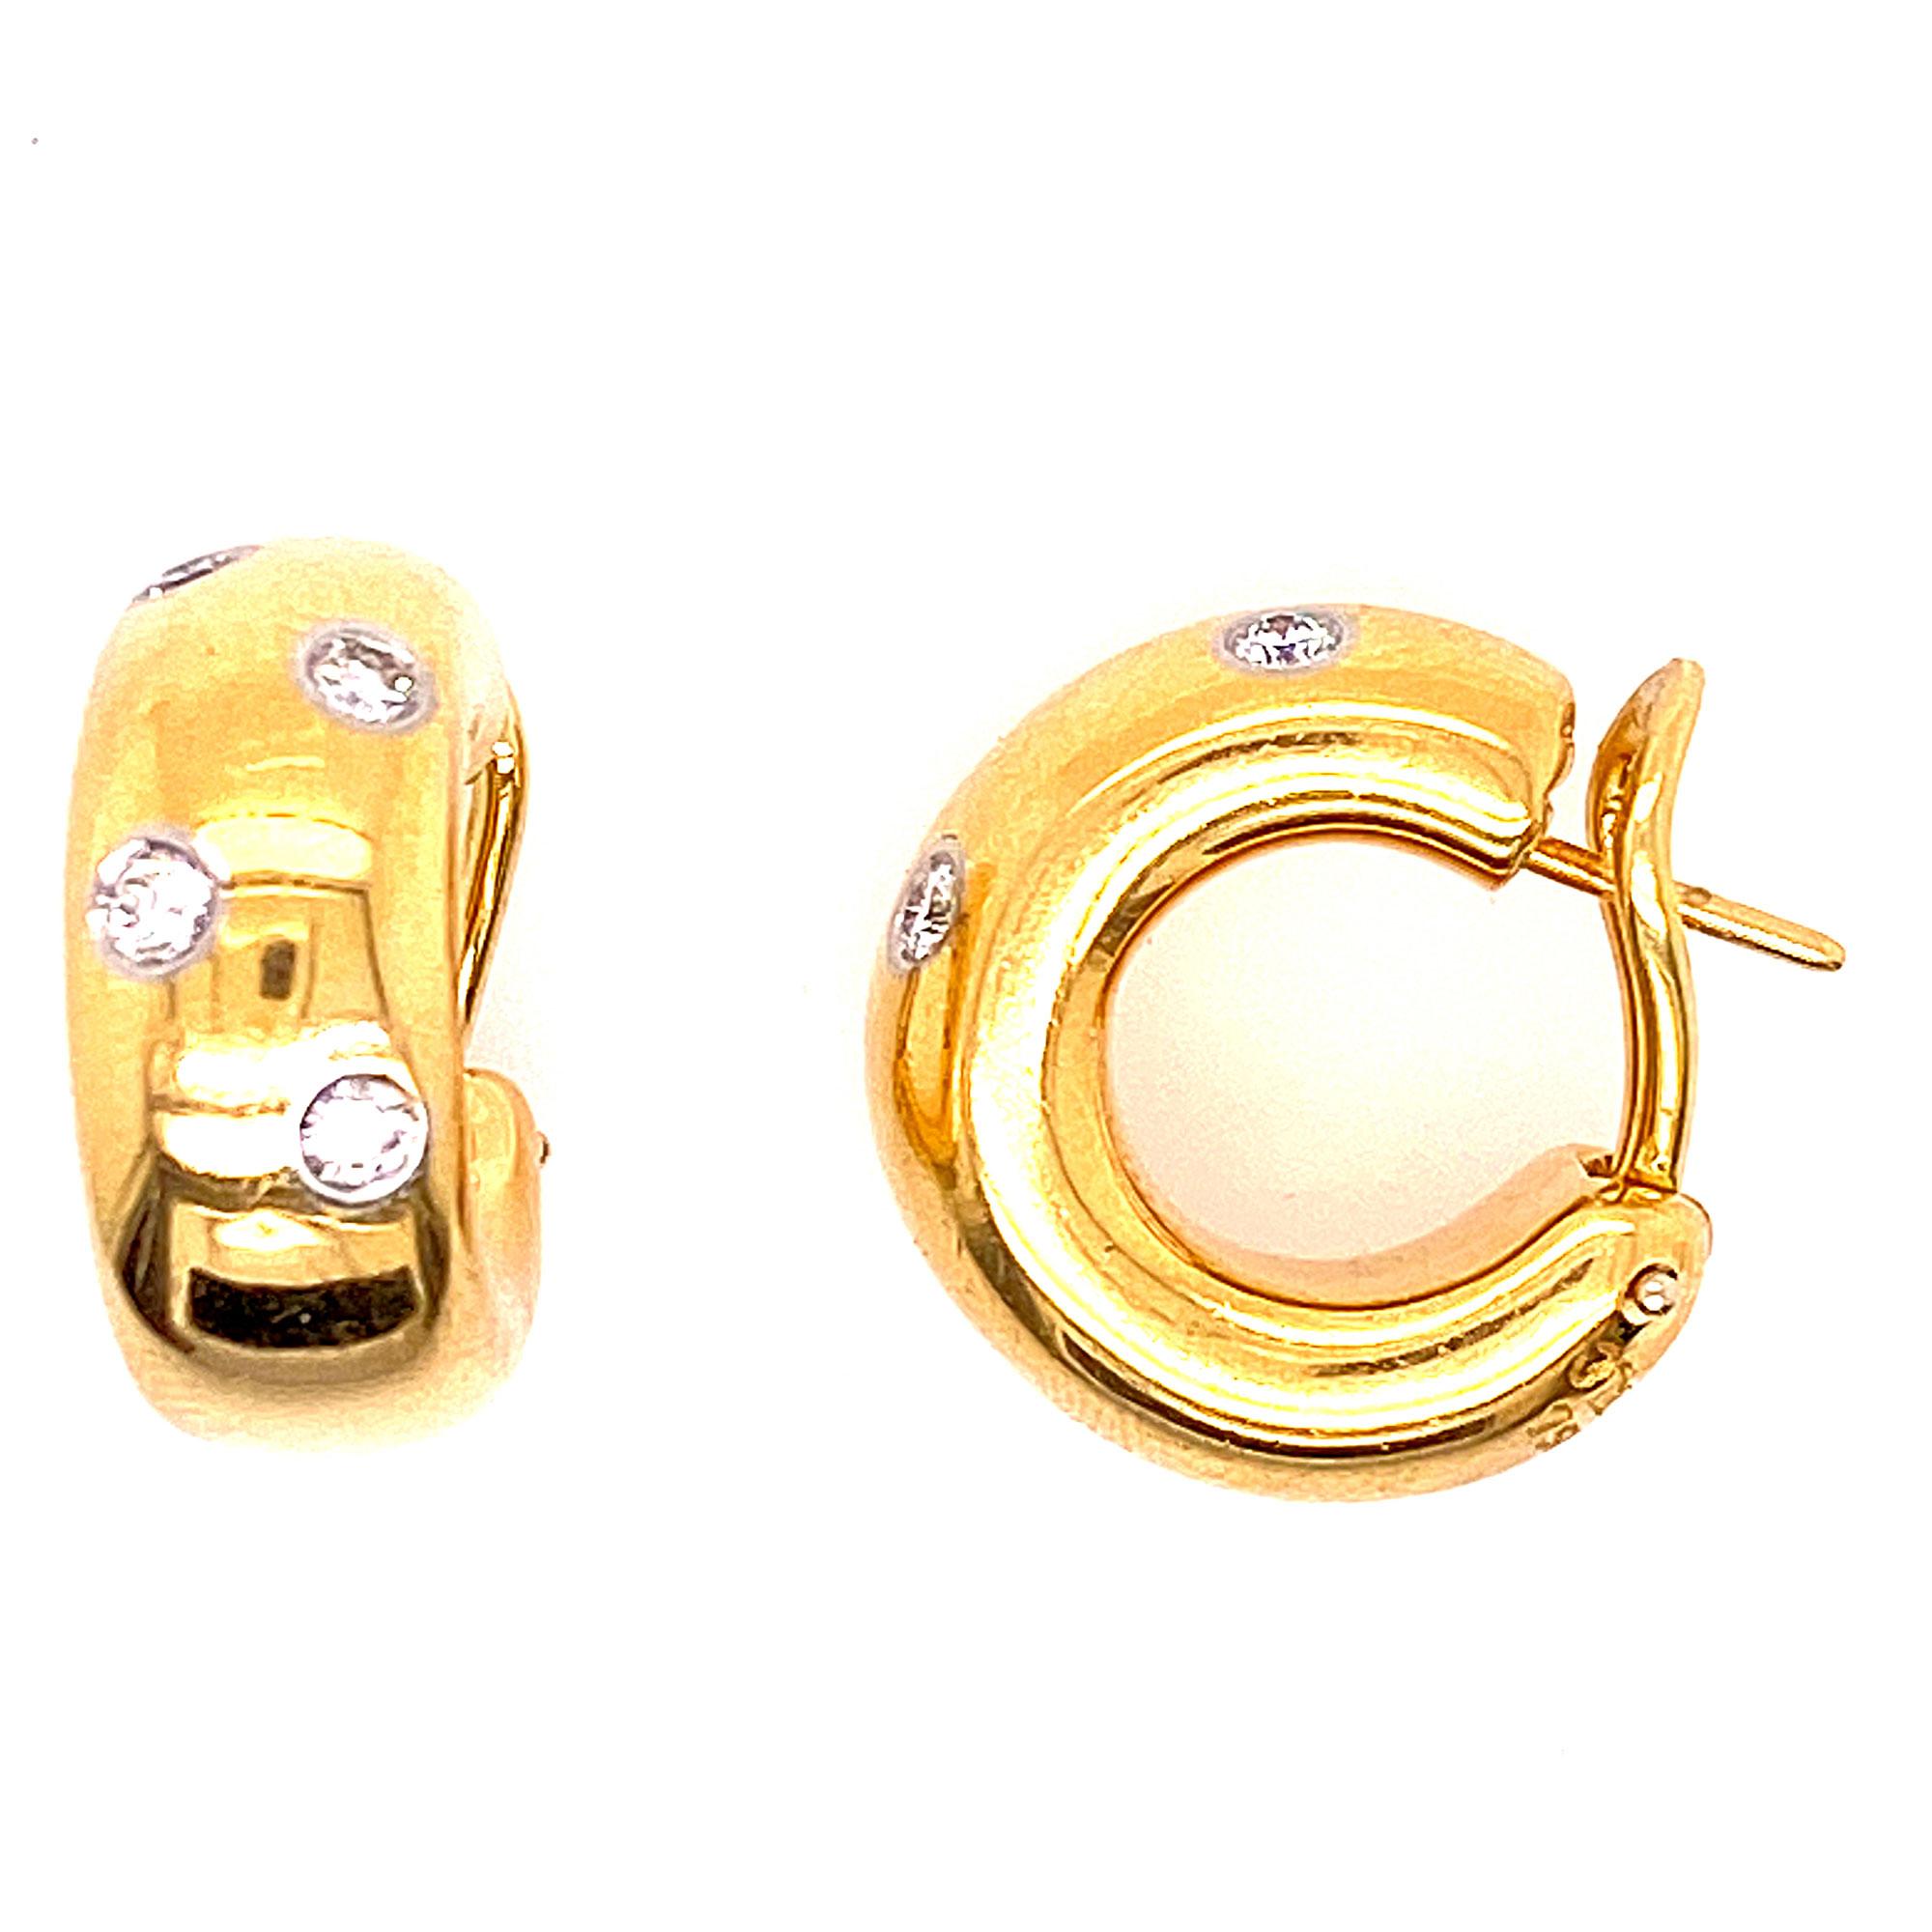 18K yellow gold Tiffany & Co. Etoile huggie hoop earrings featuring platinum bezel set 0.40 carats of round brilliant cut diamonds and omega back closures. The earrings measure approximately 15 x 20mm and are signed Tiffany & Co 750 PT950. 